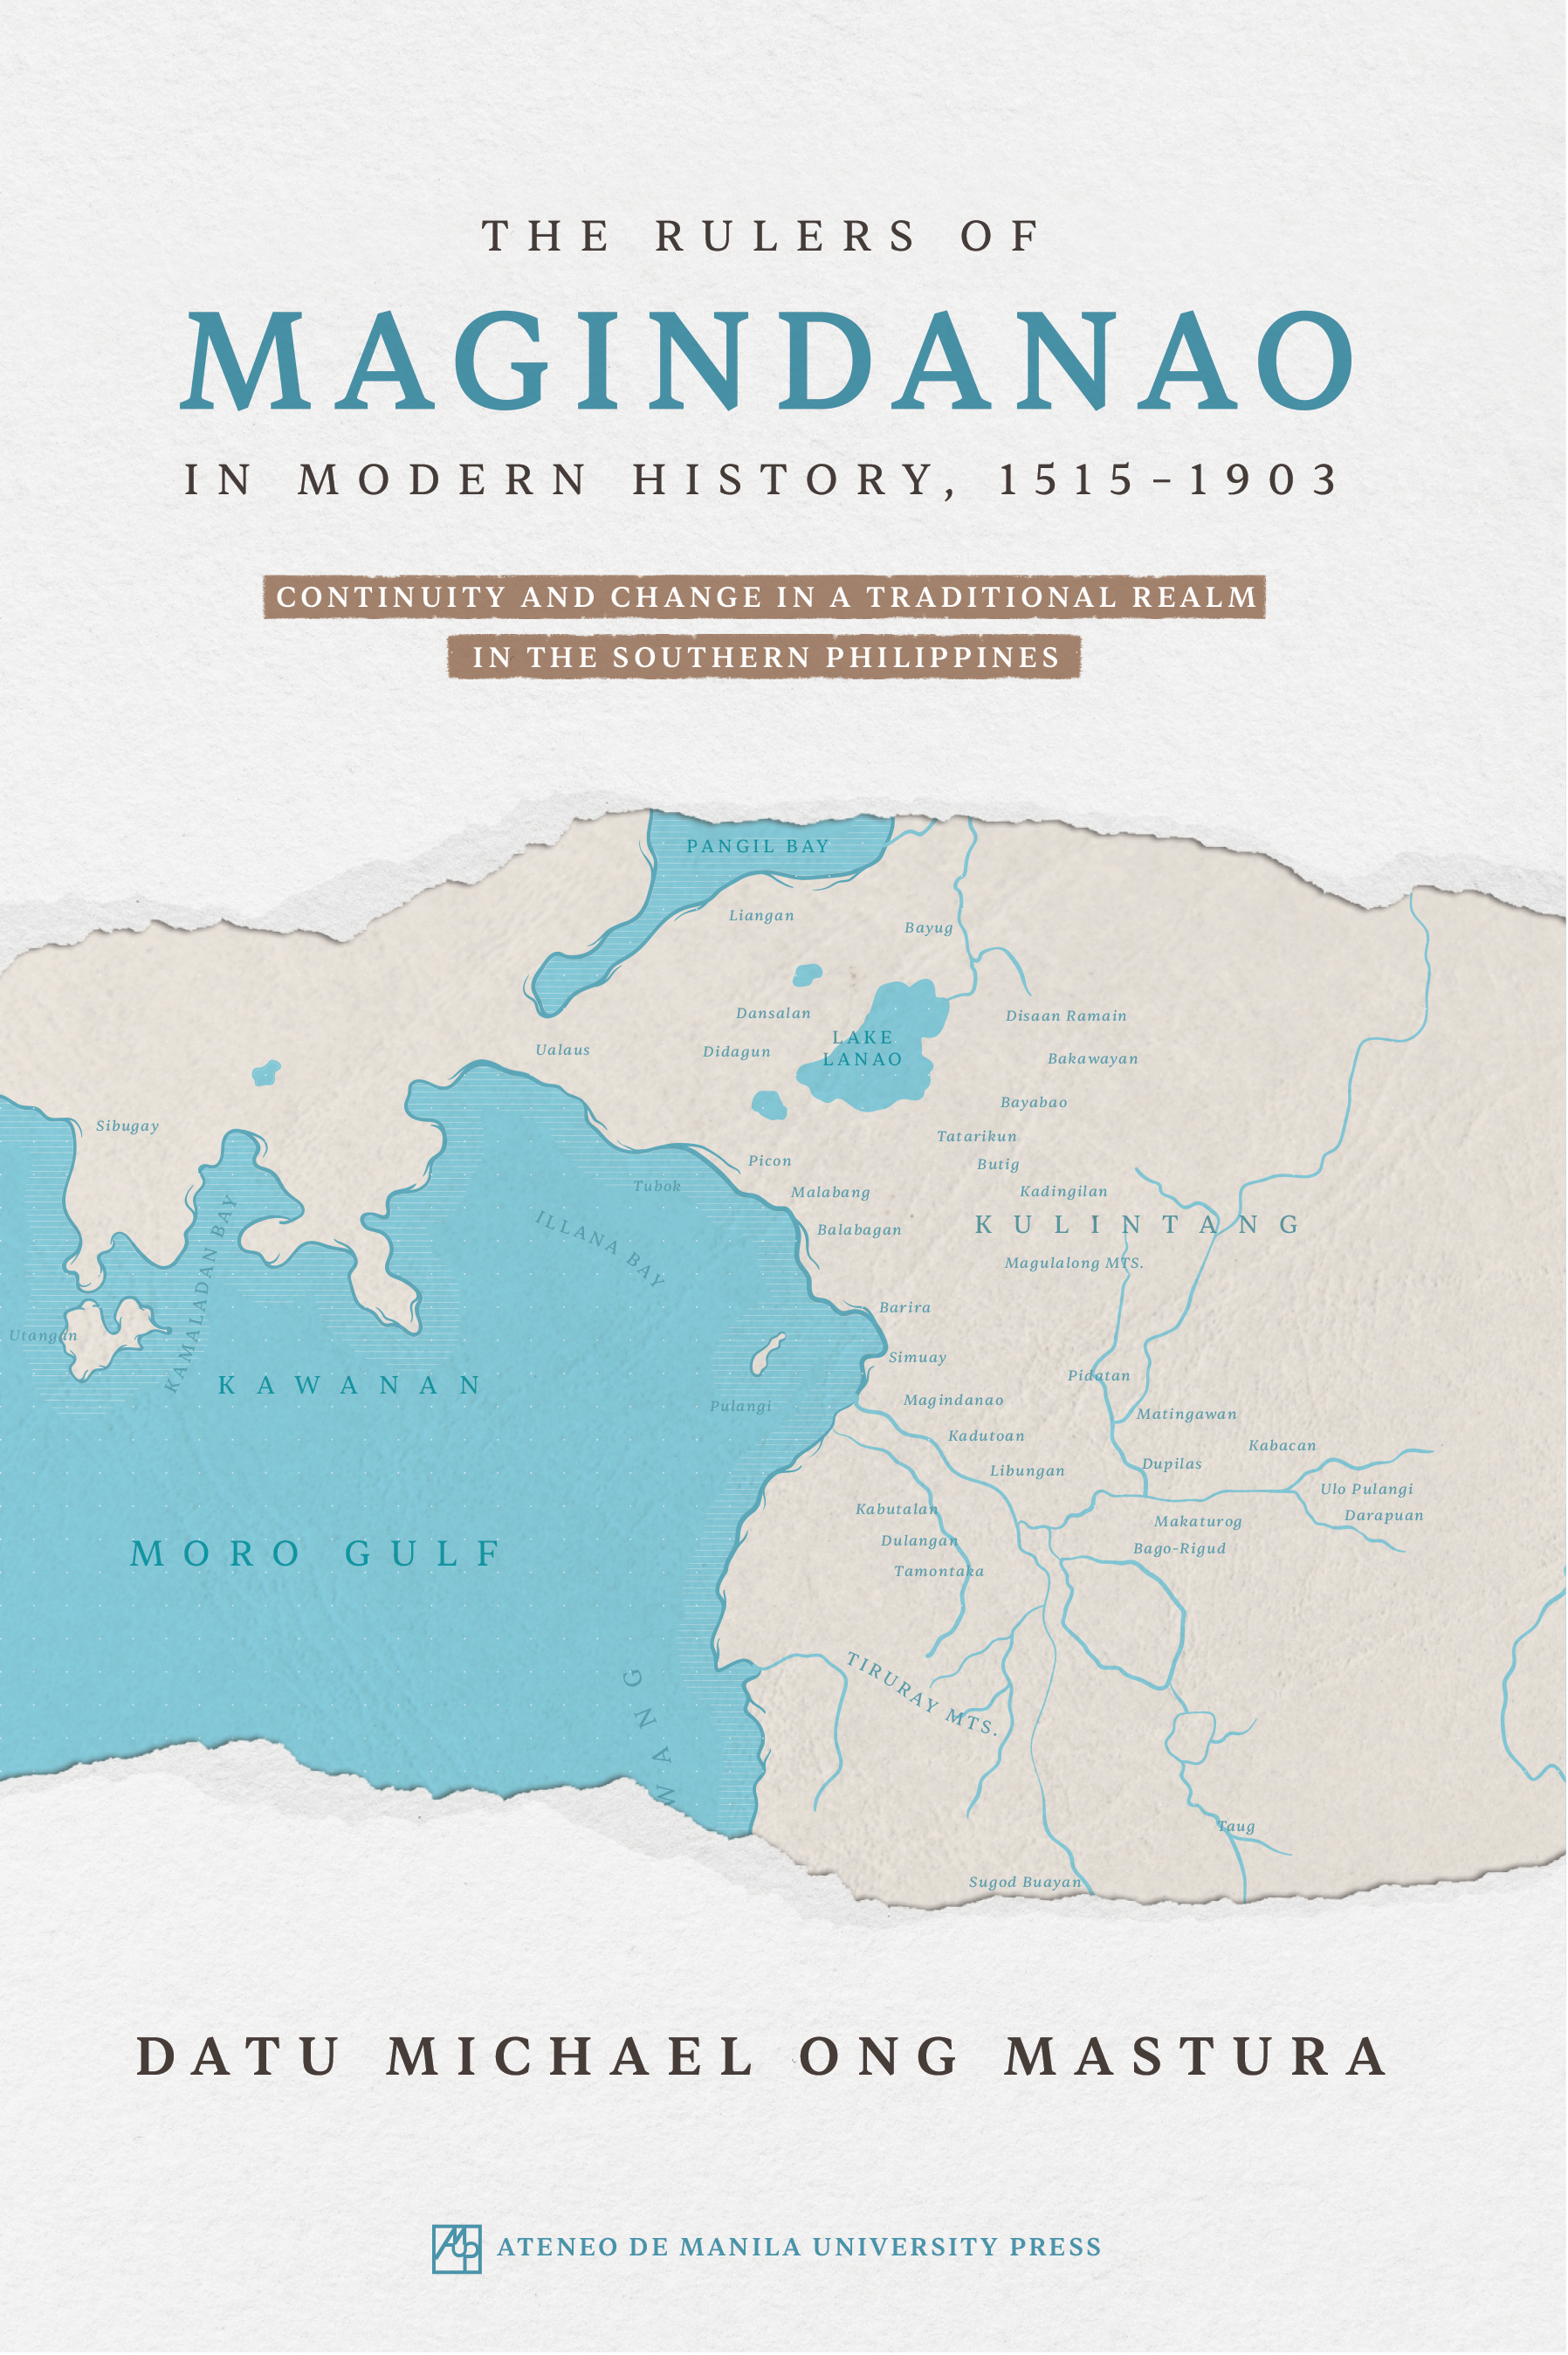 Book cover of The Rulers of Magindanao in Modern History, 1515–1903: Continuity and Change in a Traditional Realm in the Southern Philippines by Datu Michael Ong Mastura